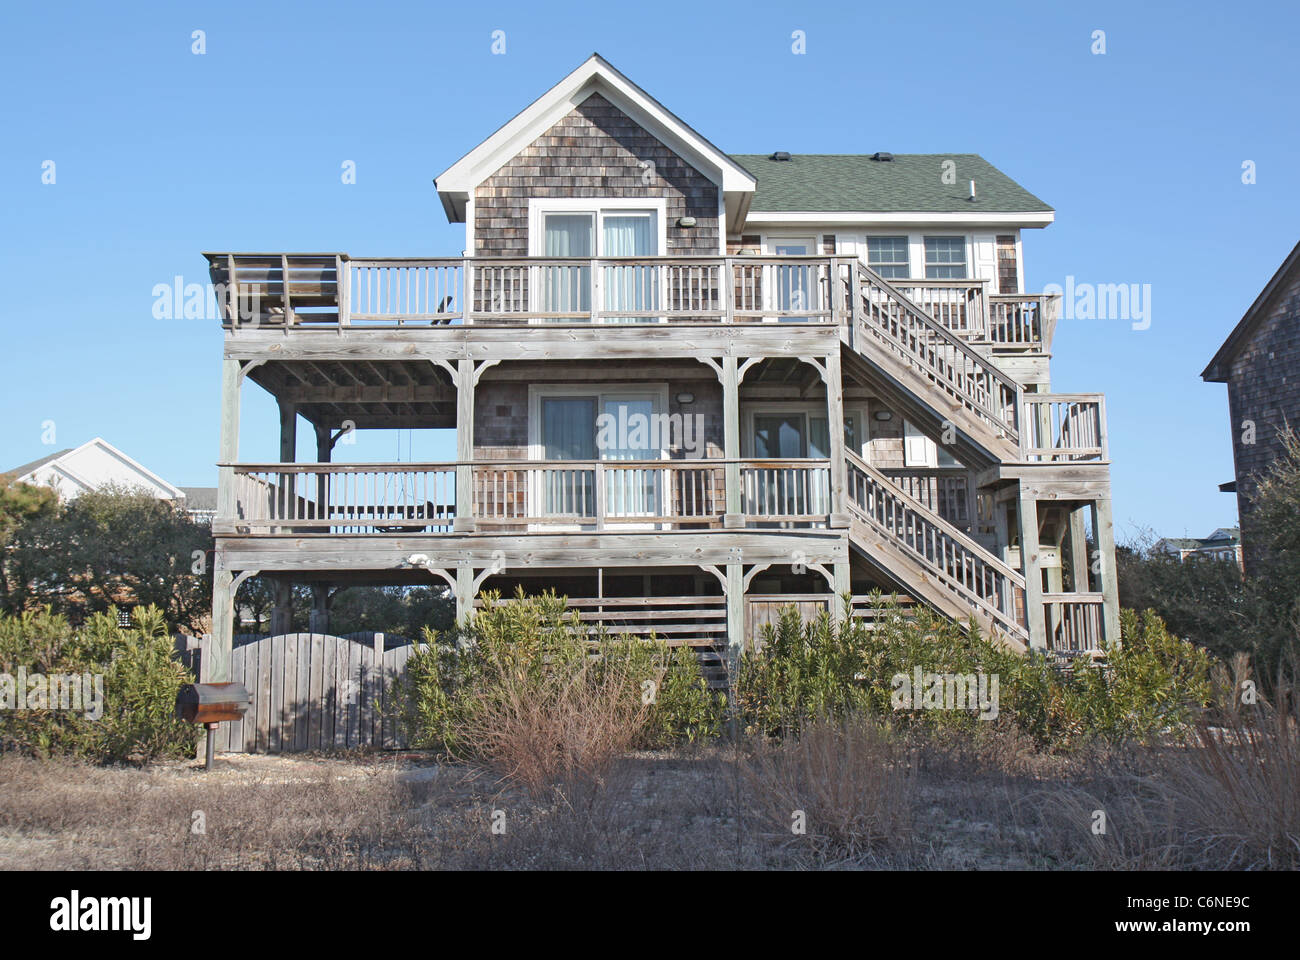 A beach house on the Outer Banks at Nags Head, North Carolina, against a bright blue sky Stock Photo